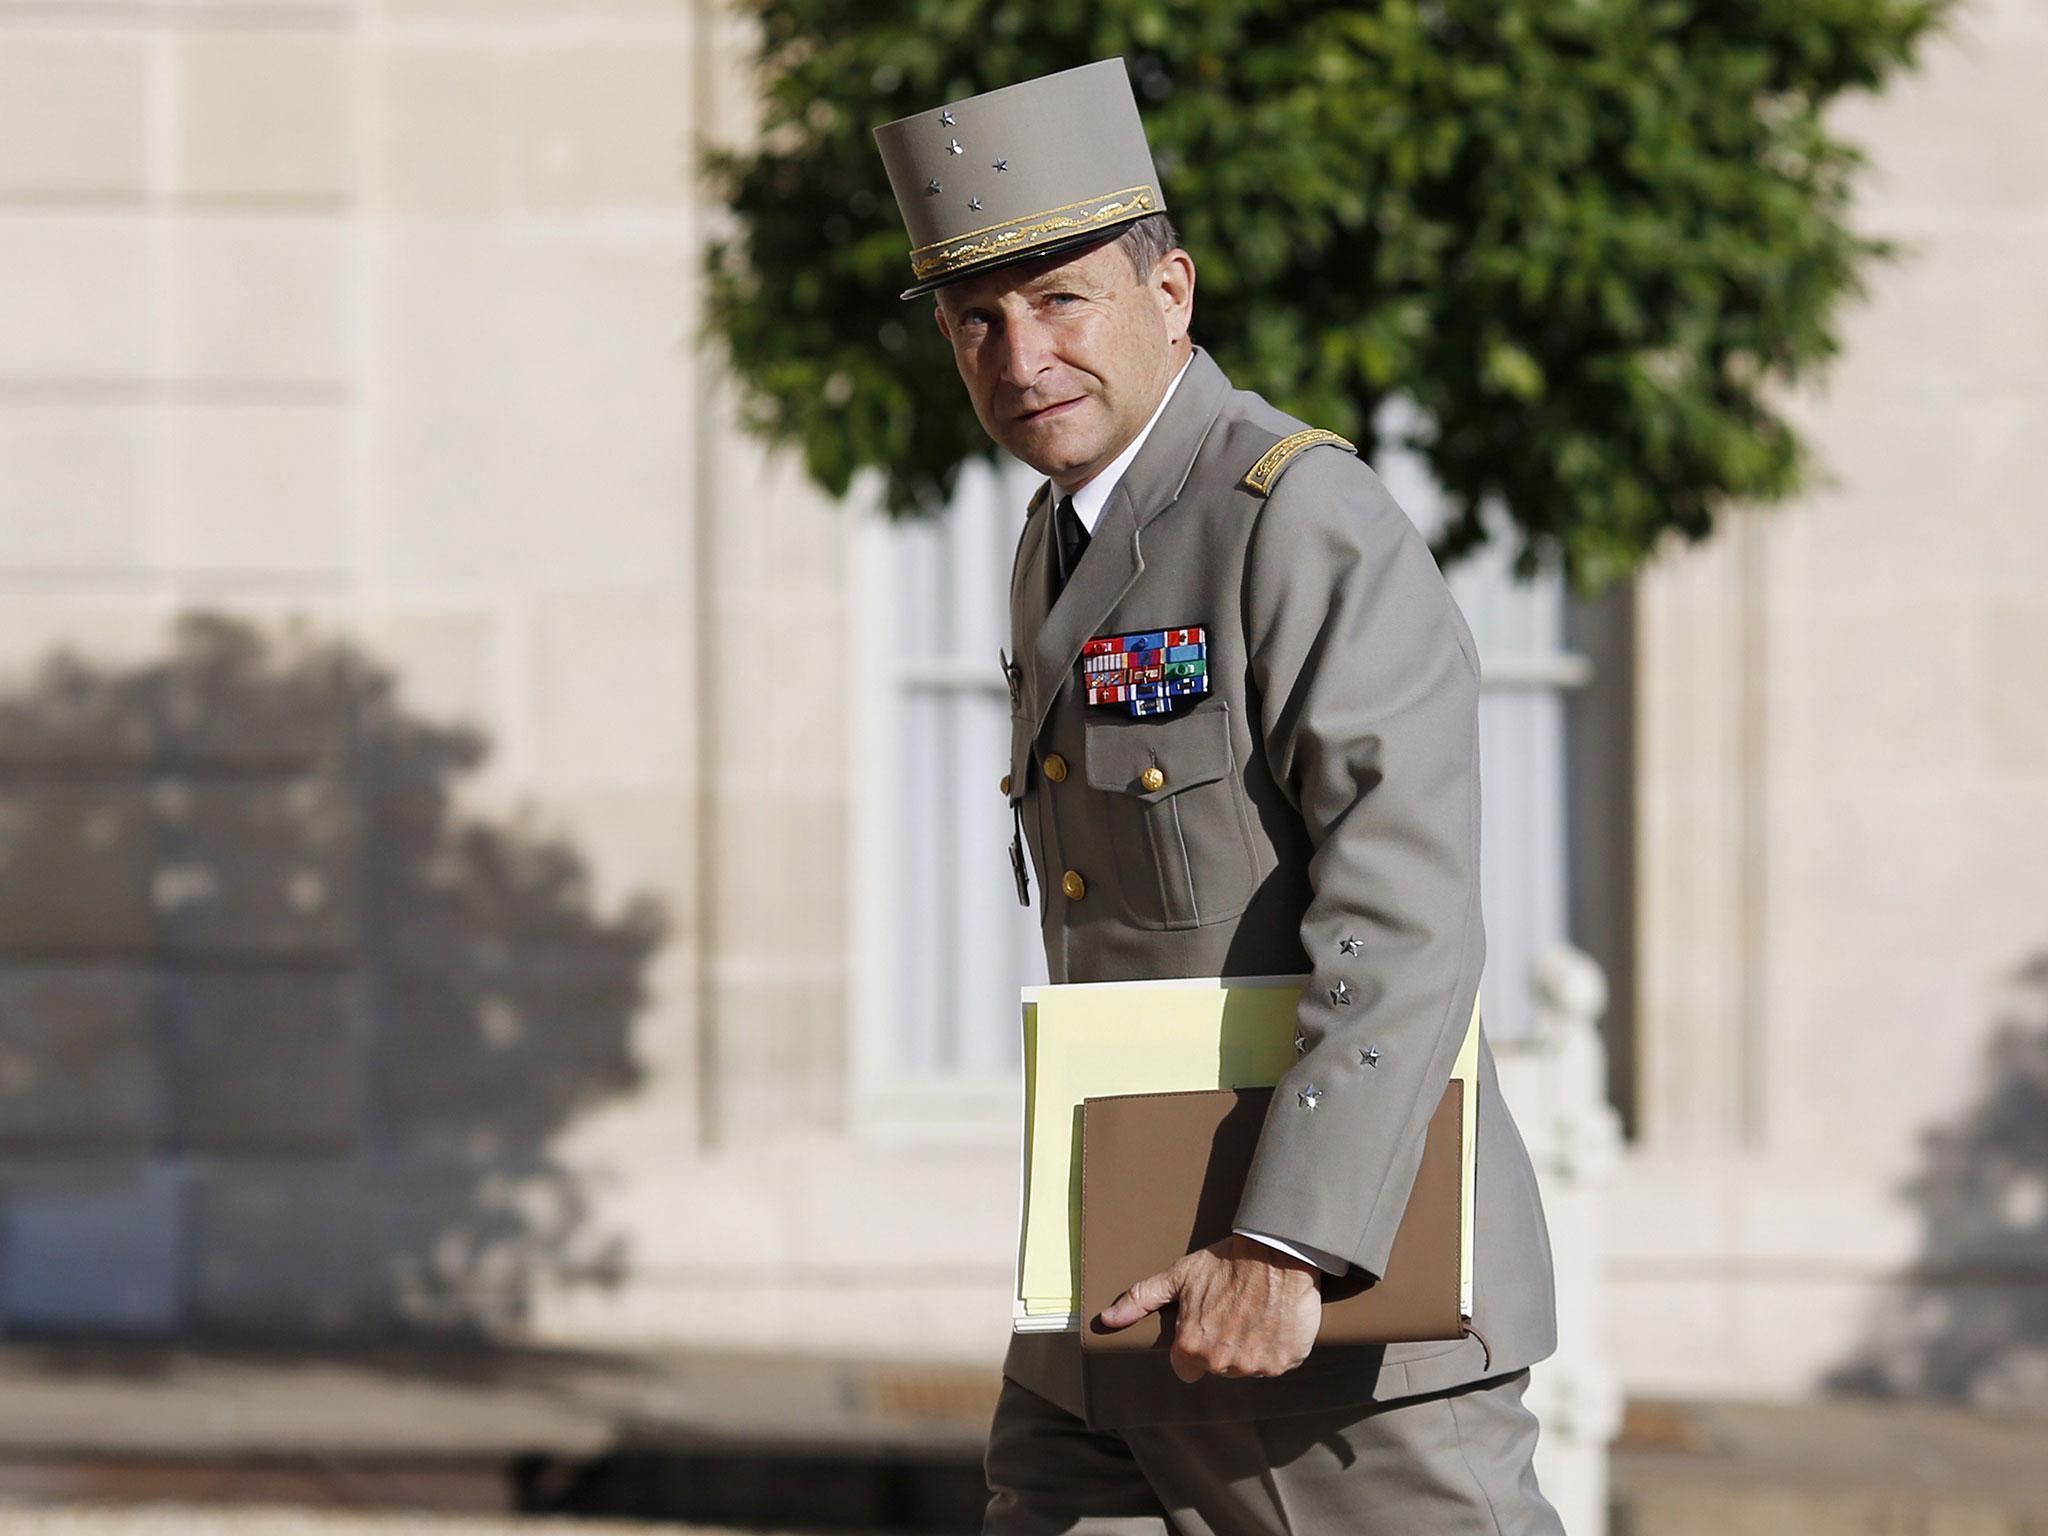 General Pierre de Villiers also called for upgrading France's nuclear arsenals